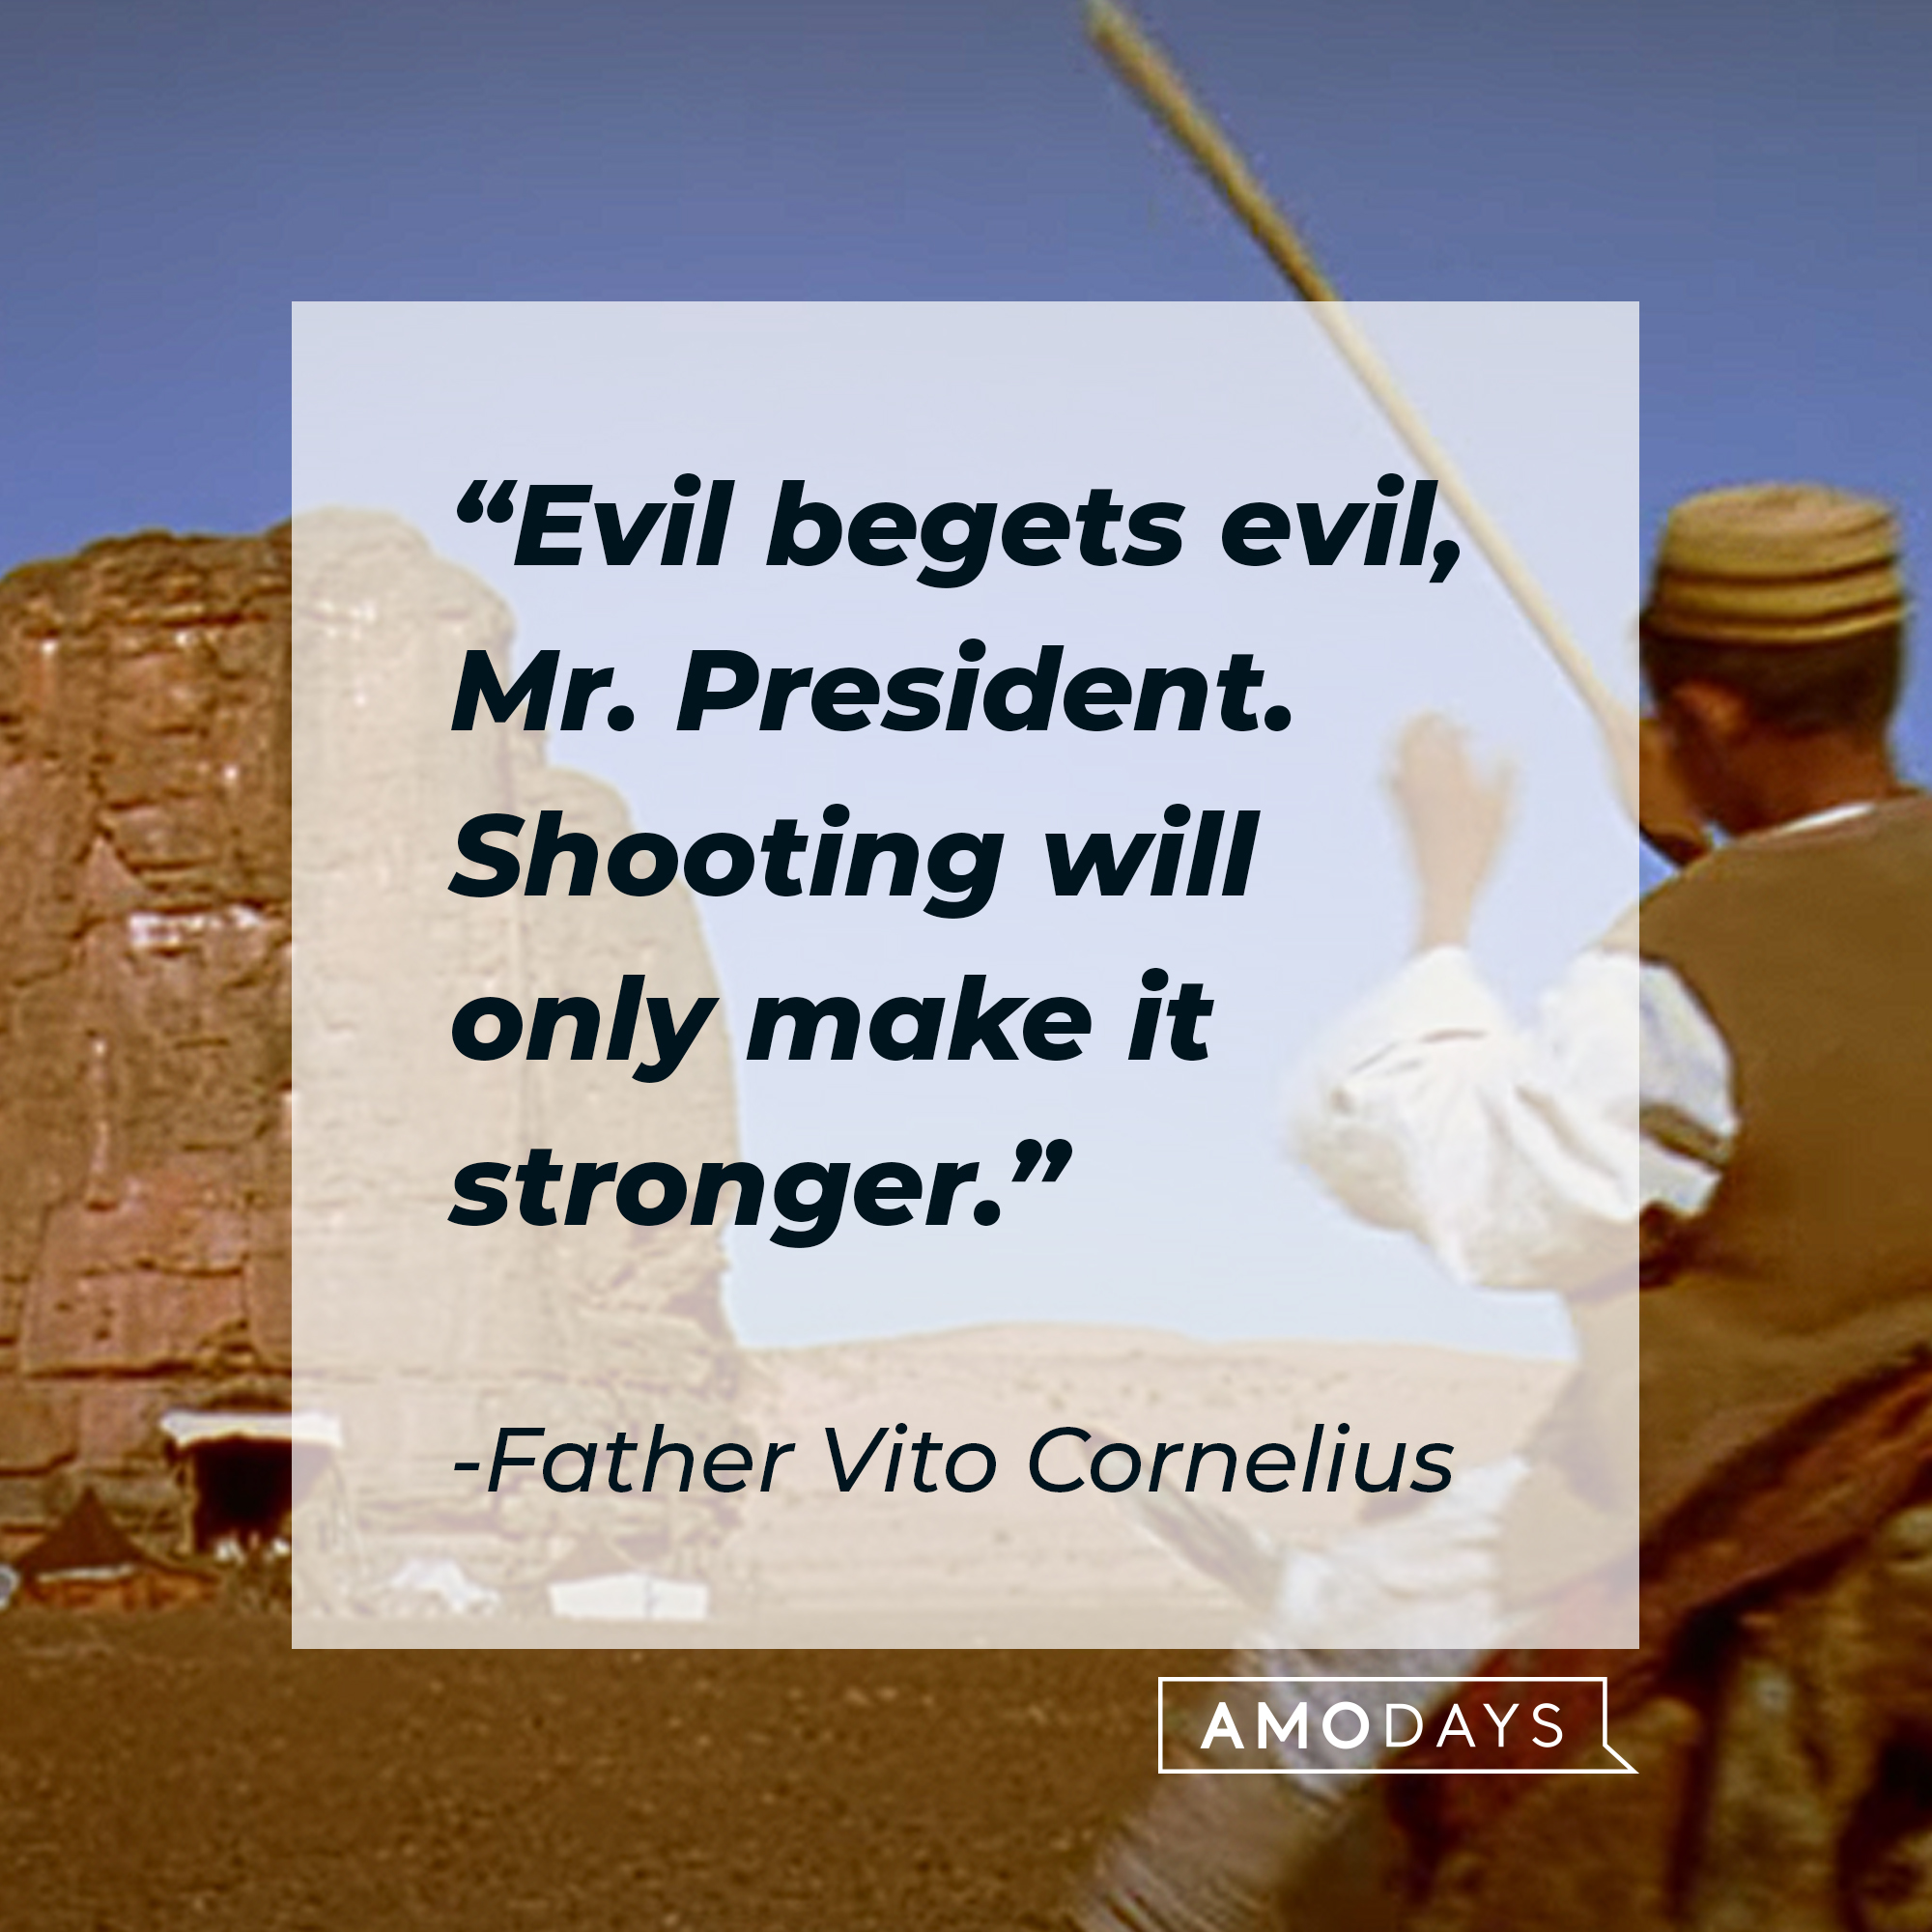 Father Vito Cornelius's quote: "Evil begets evil, Mr. President. Shooting will only make it stronger." | Source: youtube.com/sonypictures